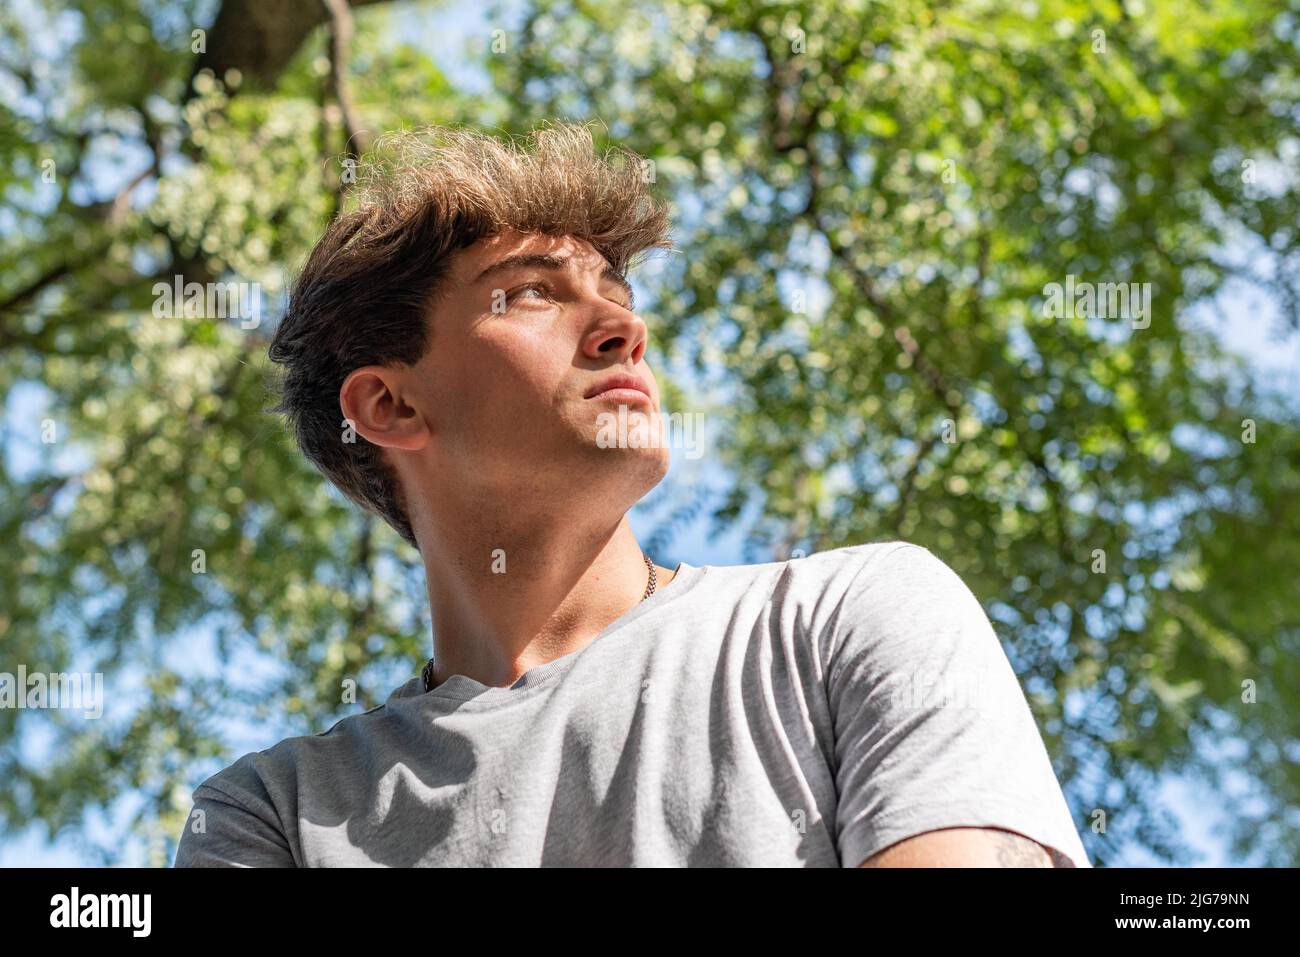 Low angle of a young man, serious in a public park Stock Photo